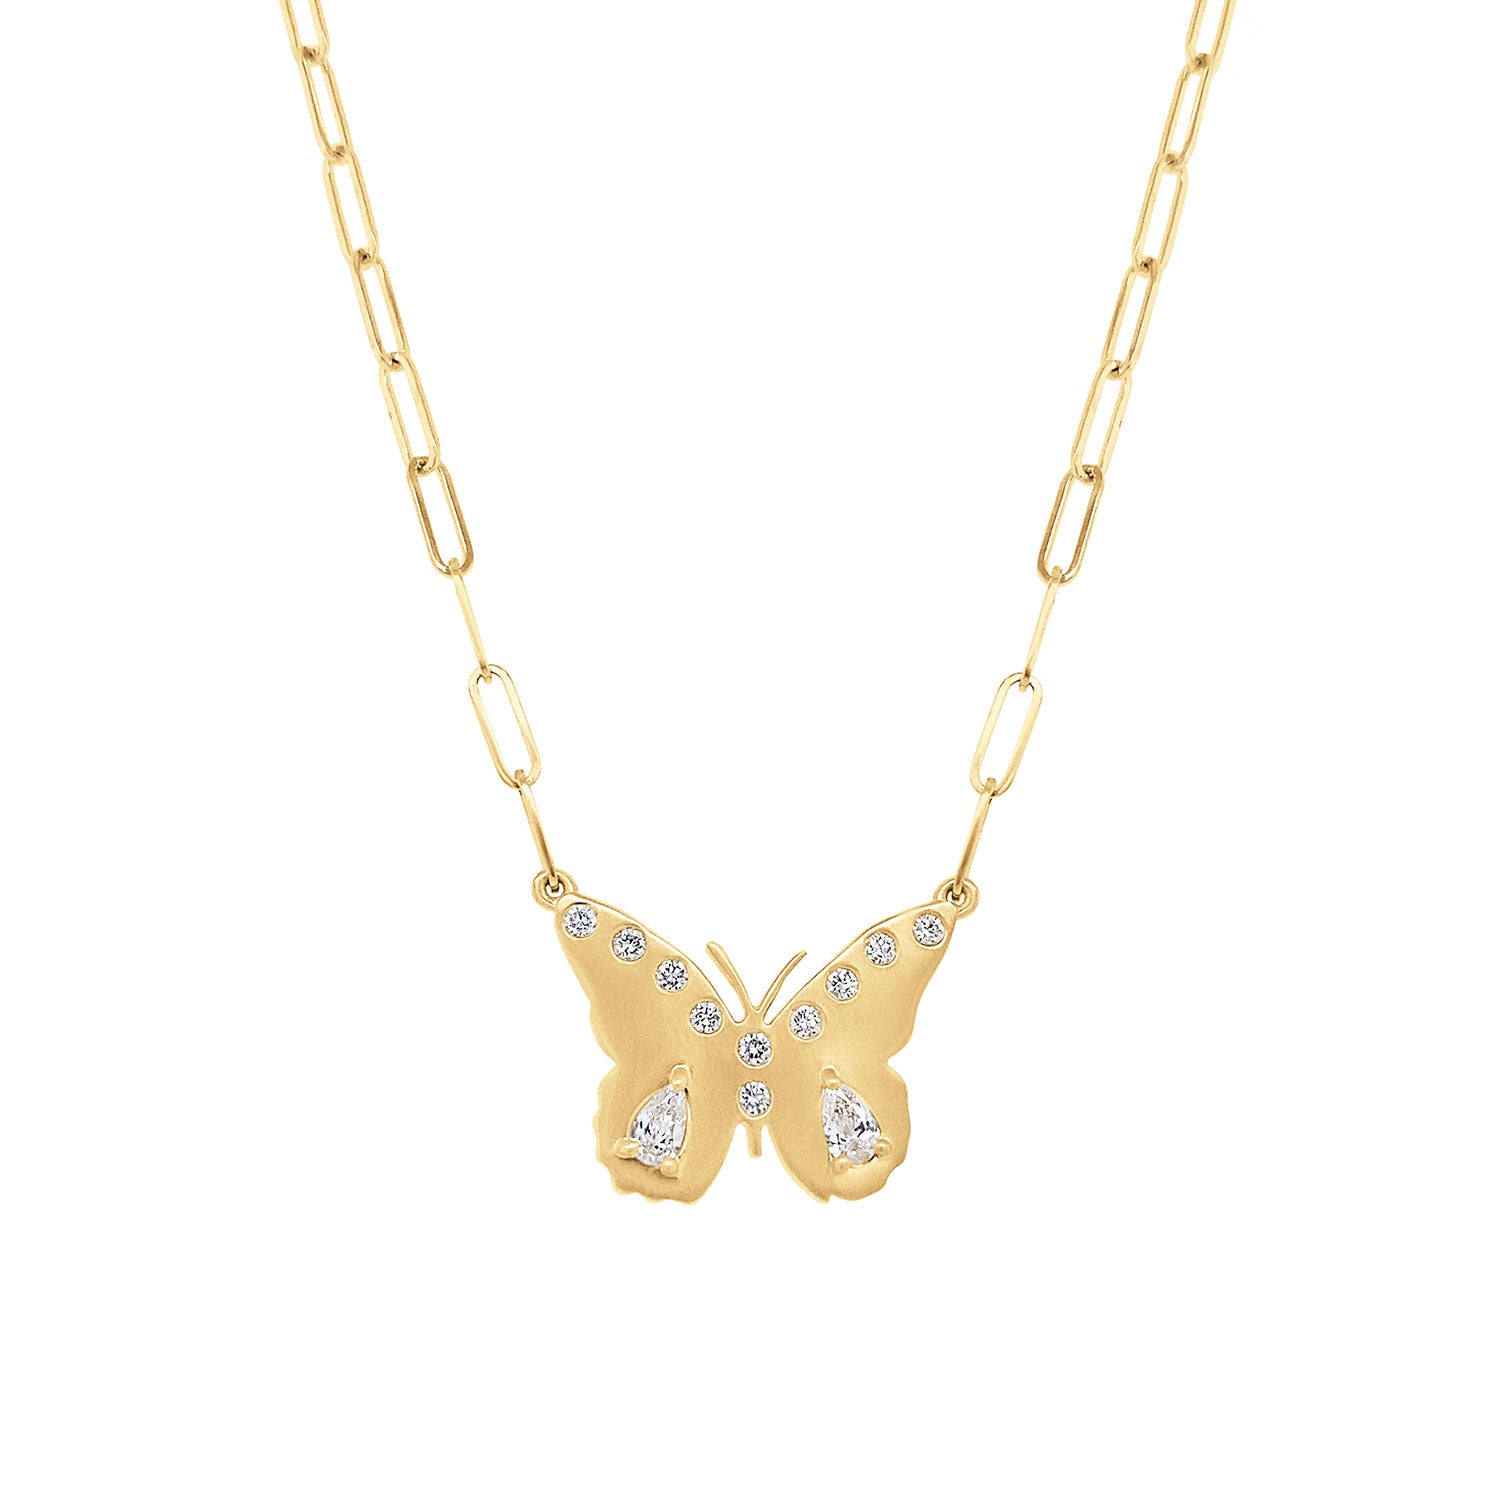 Stacey Small Butterfly Necklace